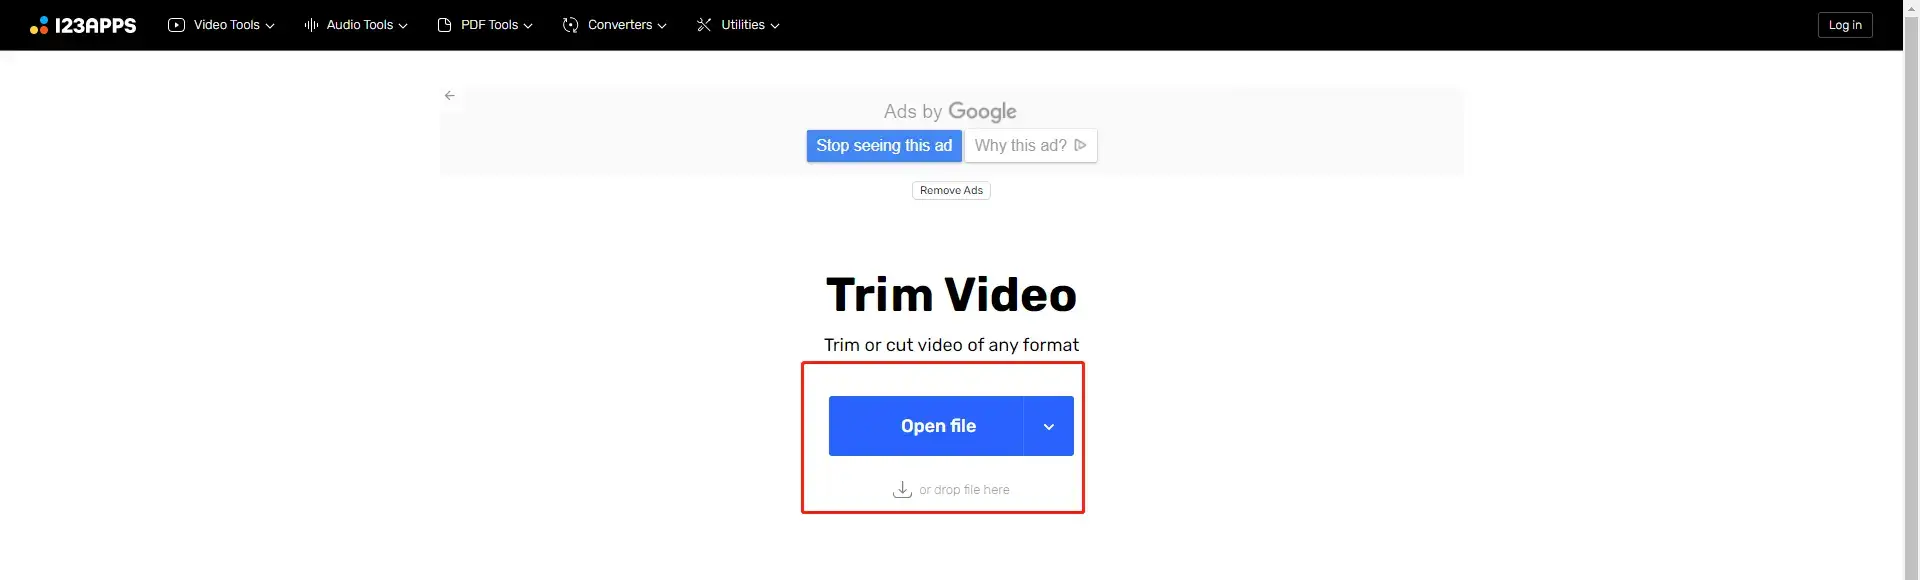 Trim a video by 123apps step 1